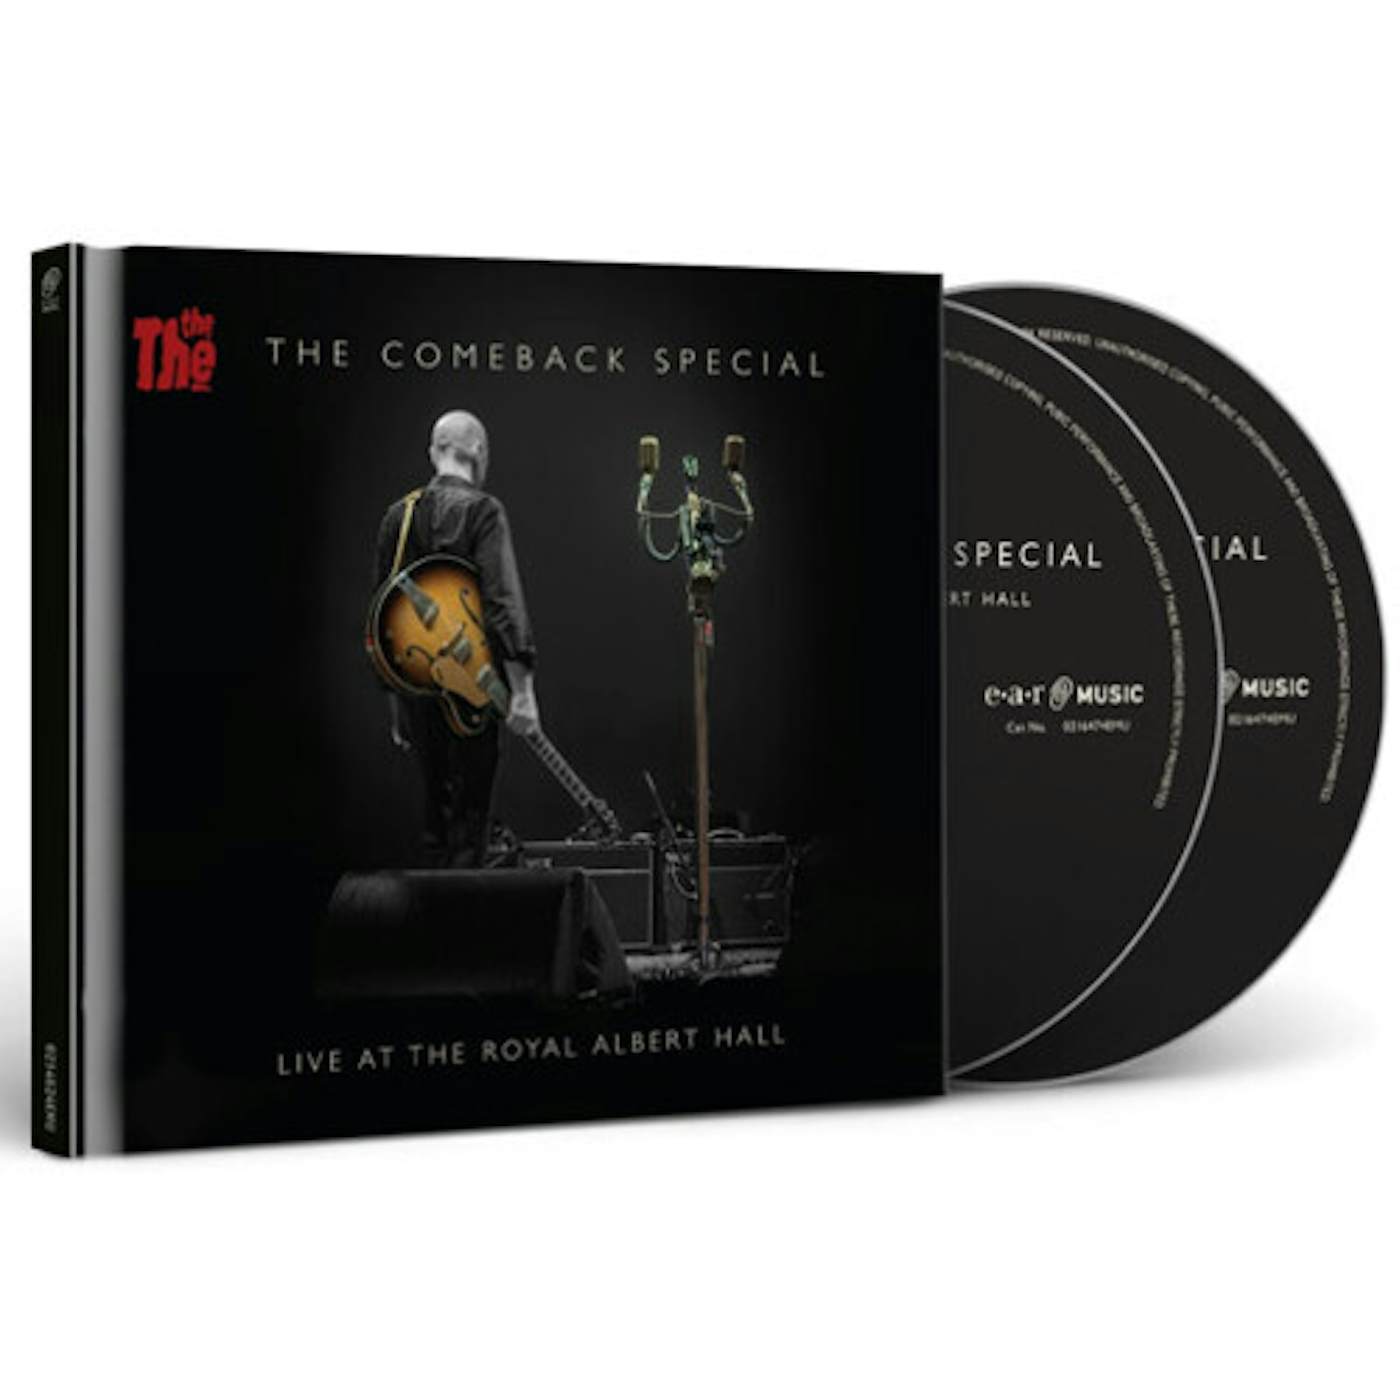 The The COMEBACK SPECIAL CD